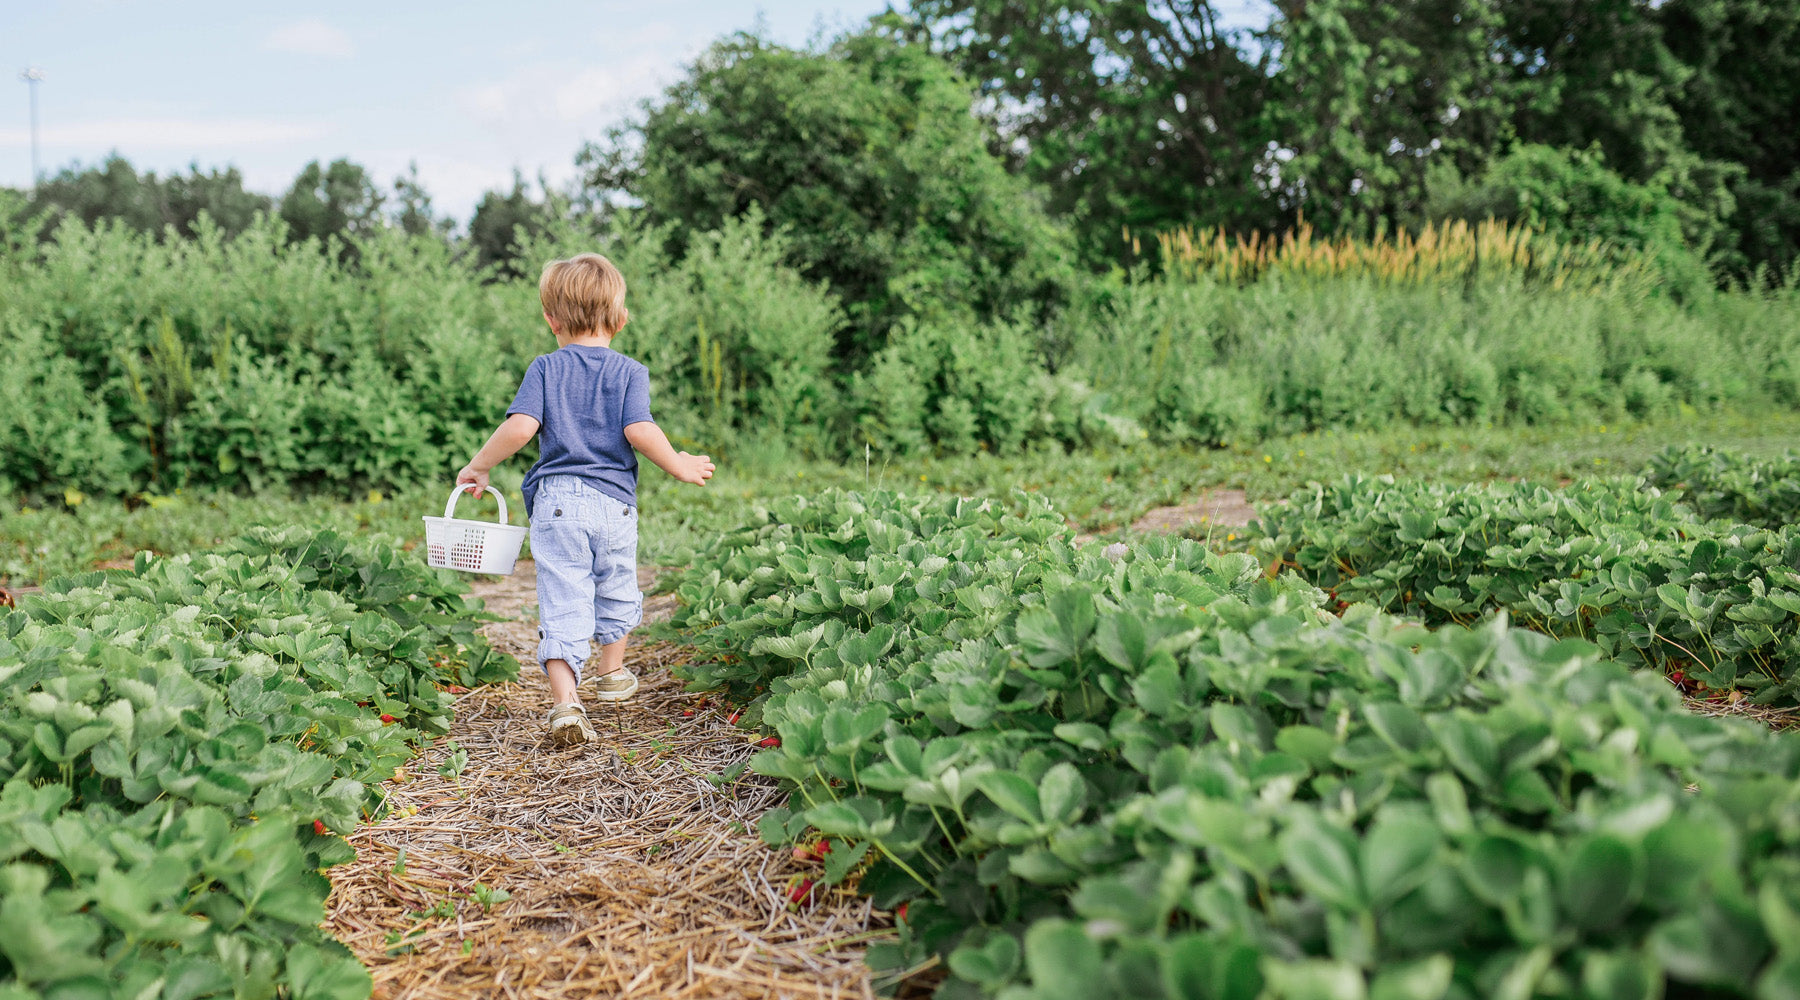 11 Tips for Gardening with Kids